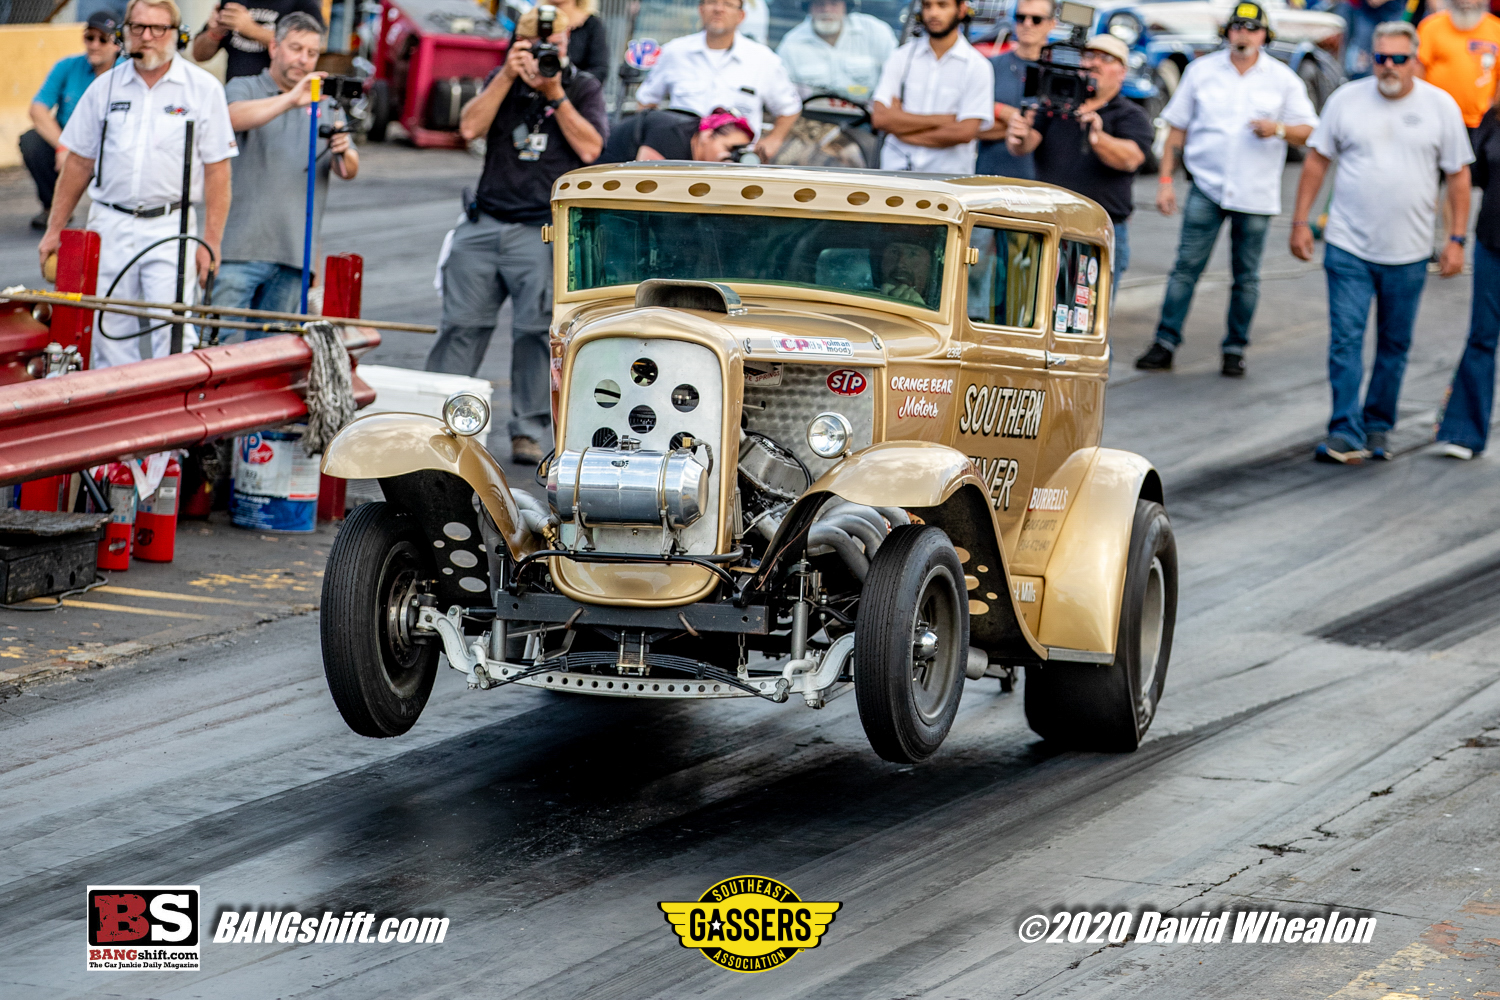 Drag Action Photos: The Southeast Gassers Association At Shadyside Dragway! More Wheels Up Madness!